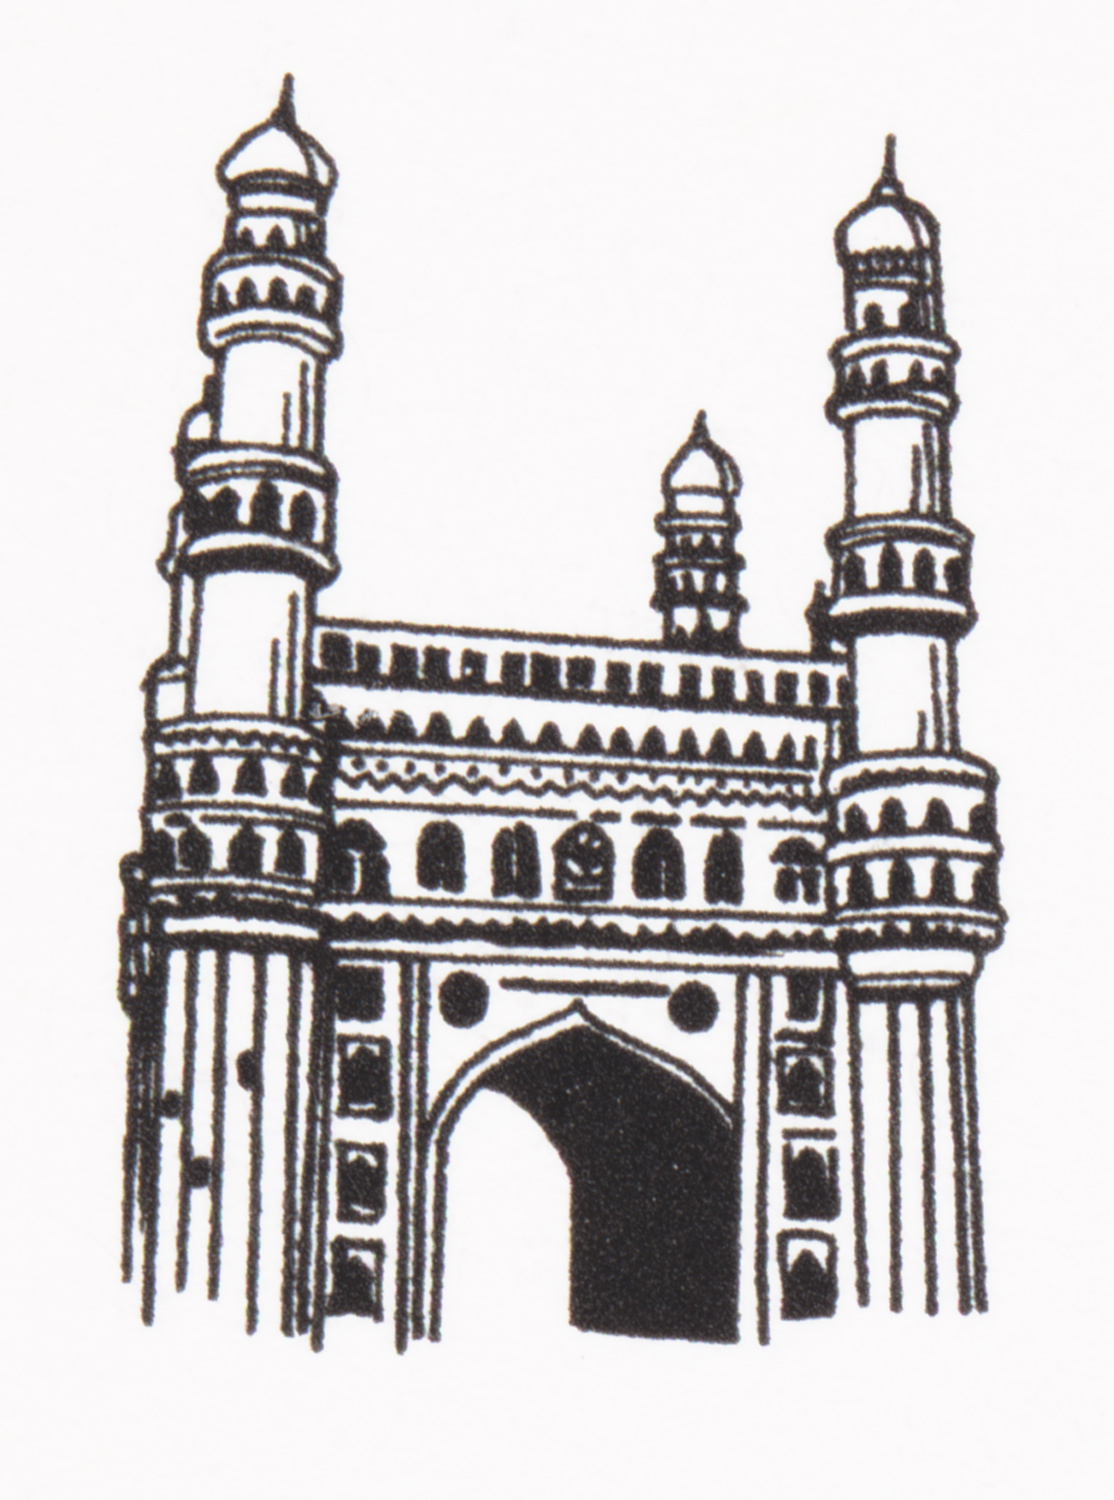 Charminar Hyderabad - INDIA by Mohit Panchal on Dribbble